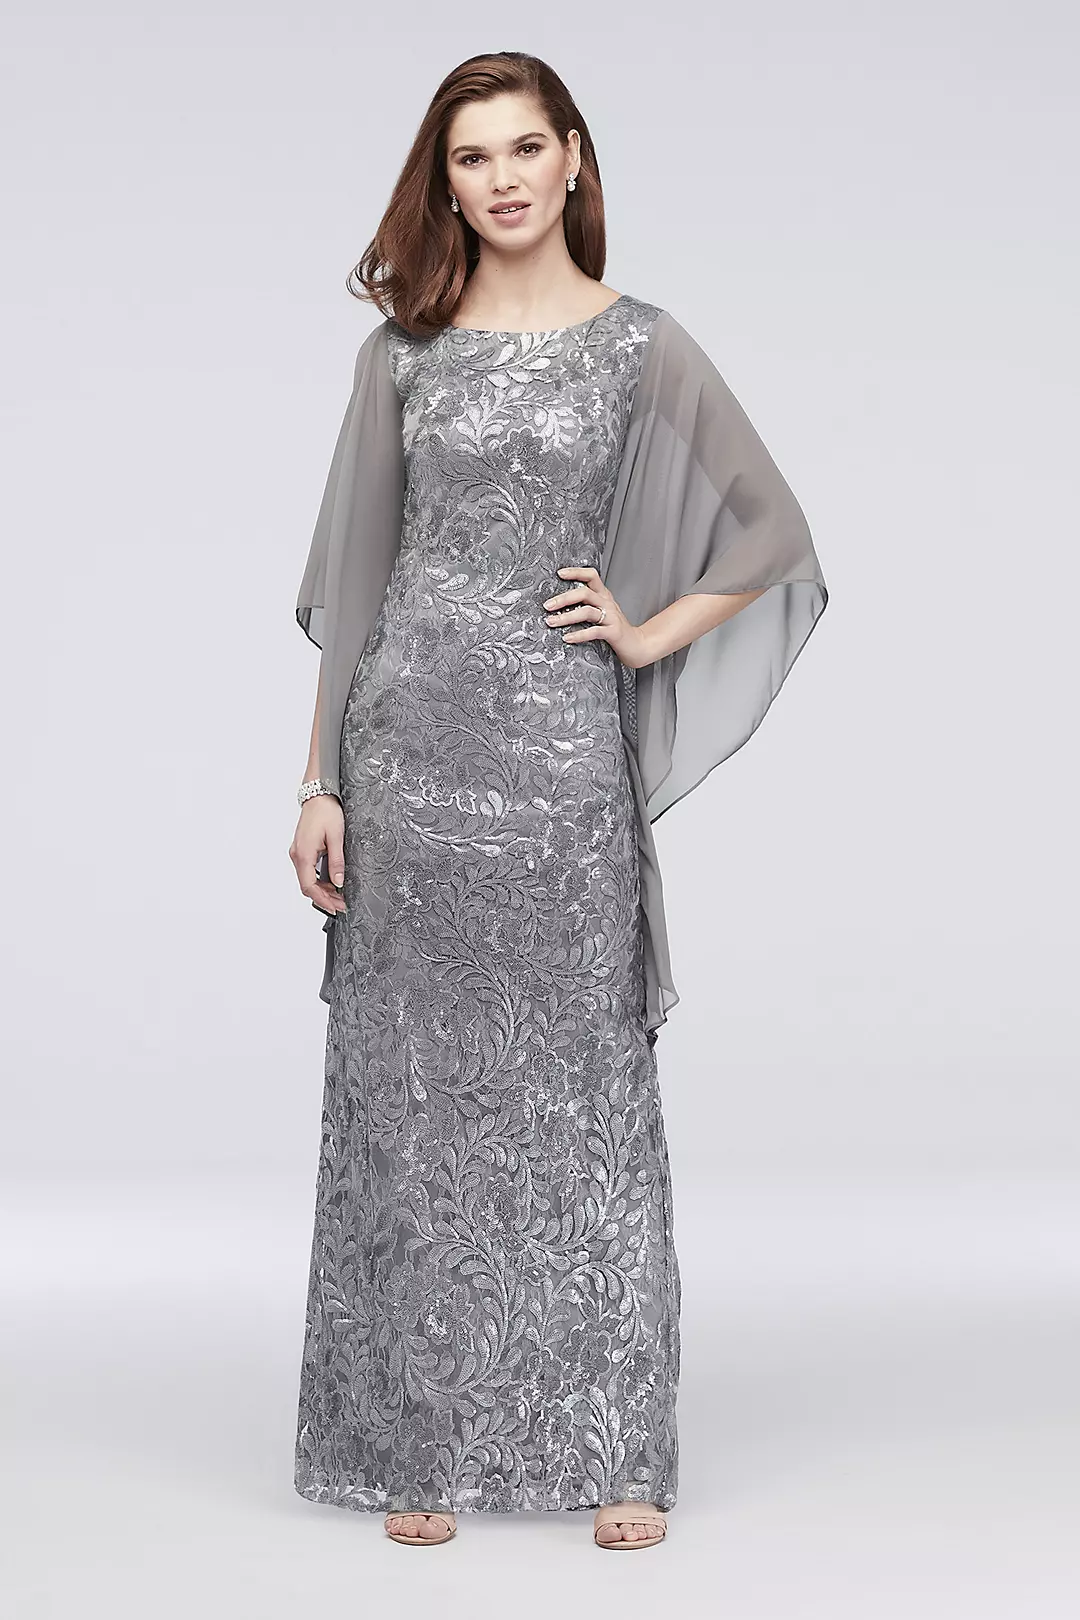 High-Neck Sequin Lace Dress with Cape Sleeves Image